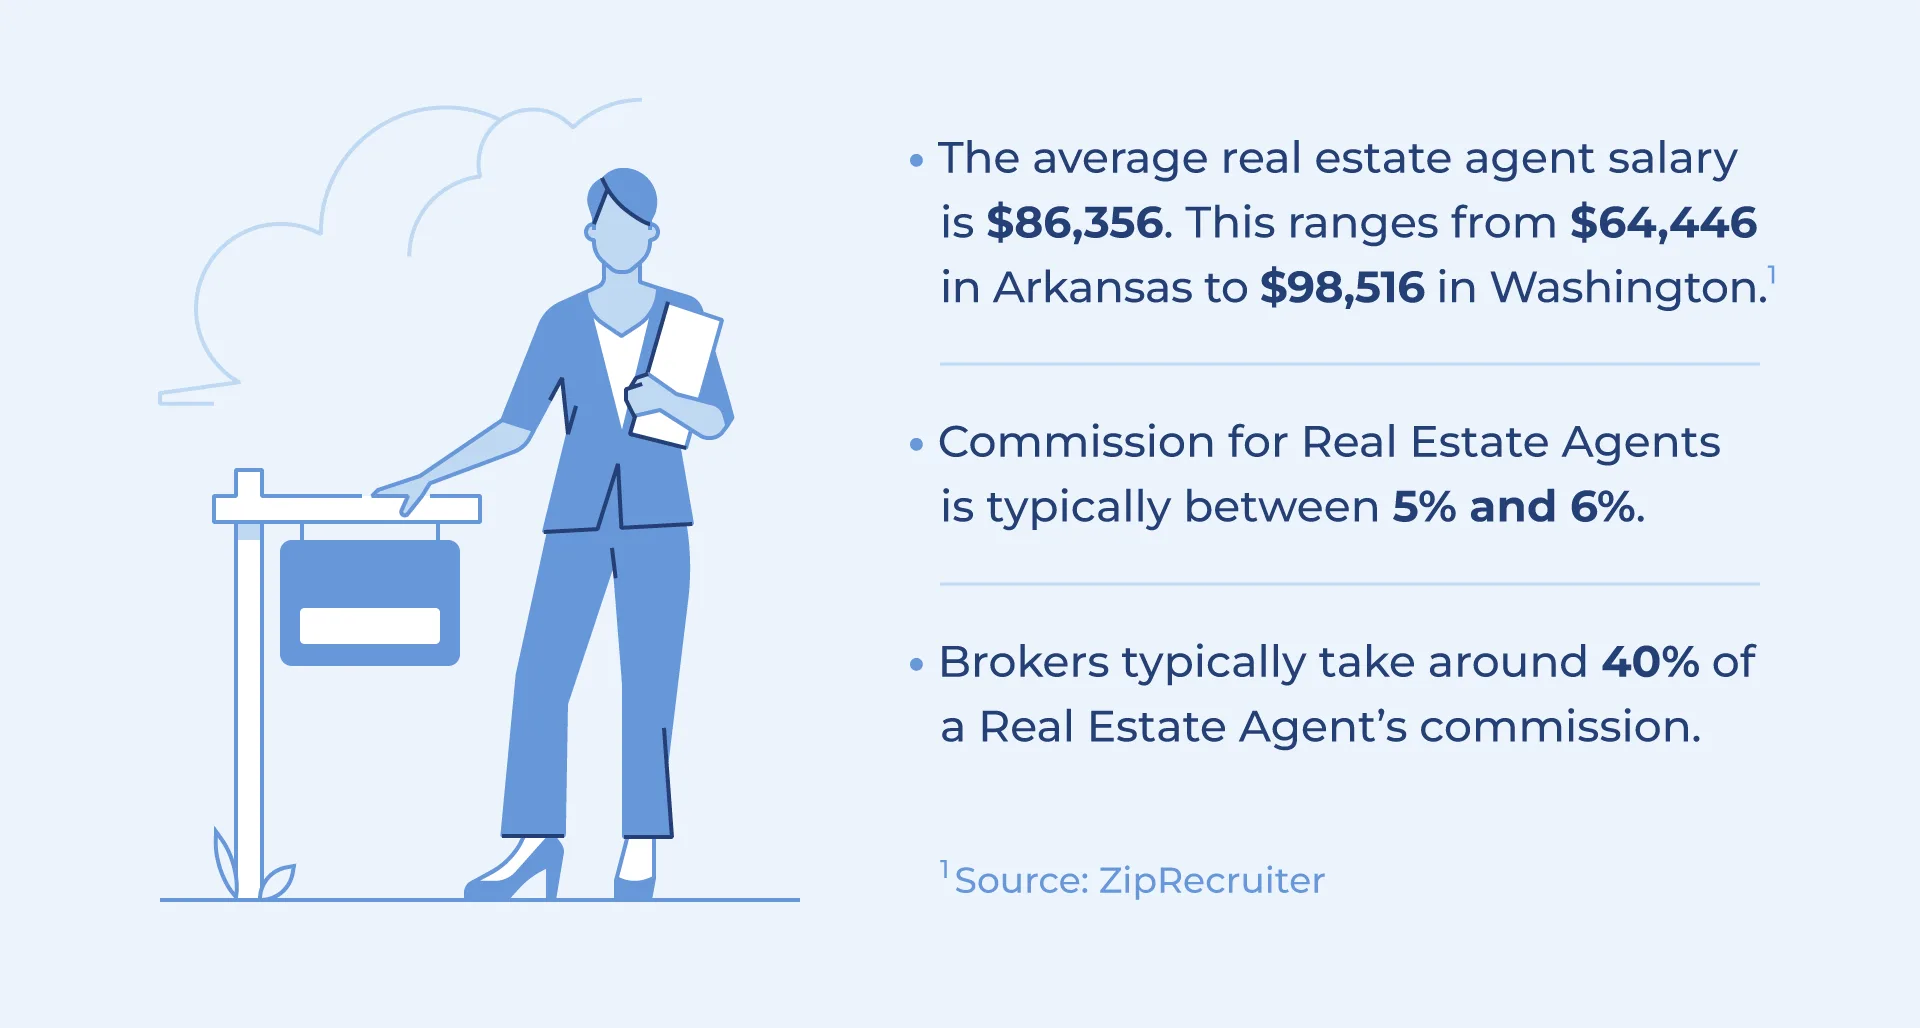 Image shows some key facts about real estate commission.